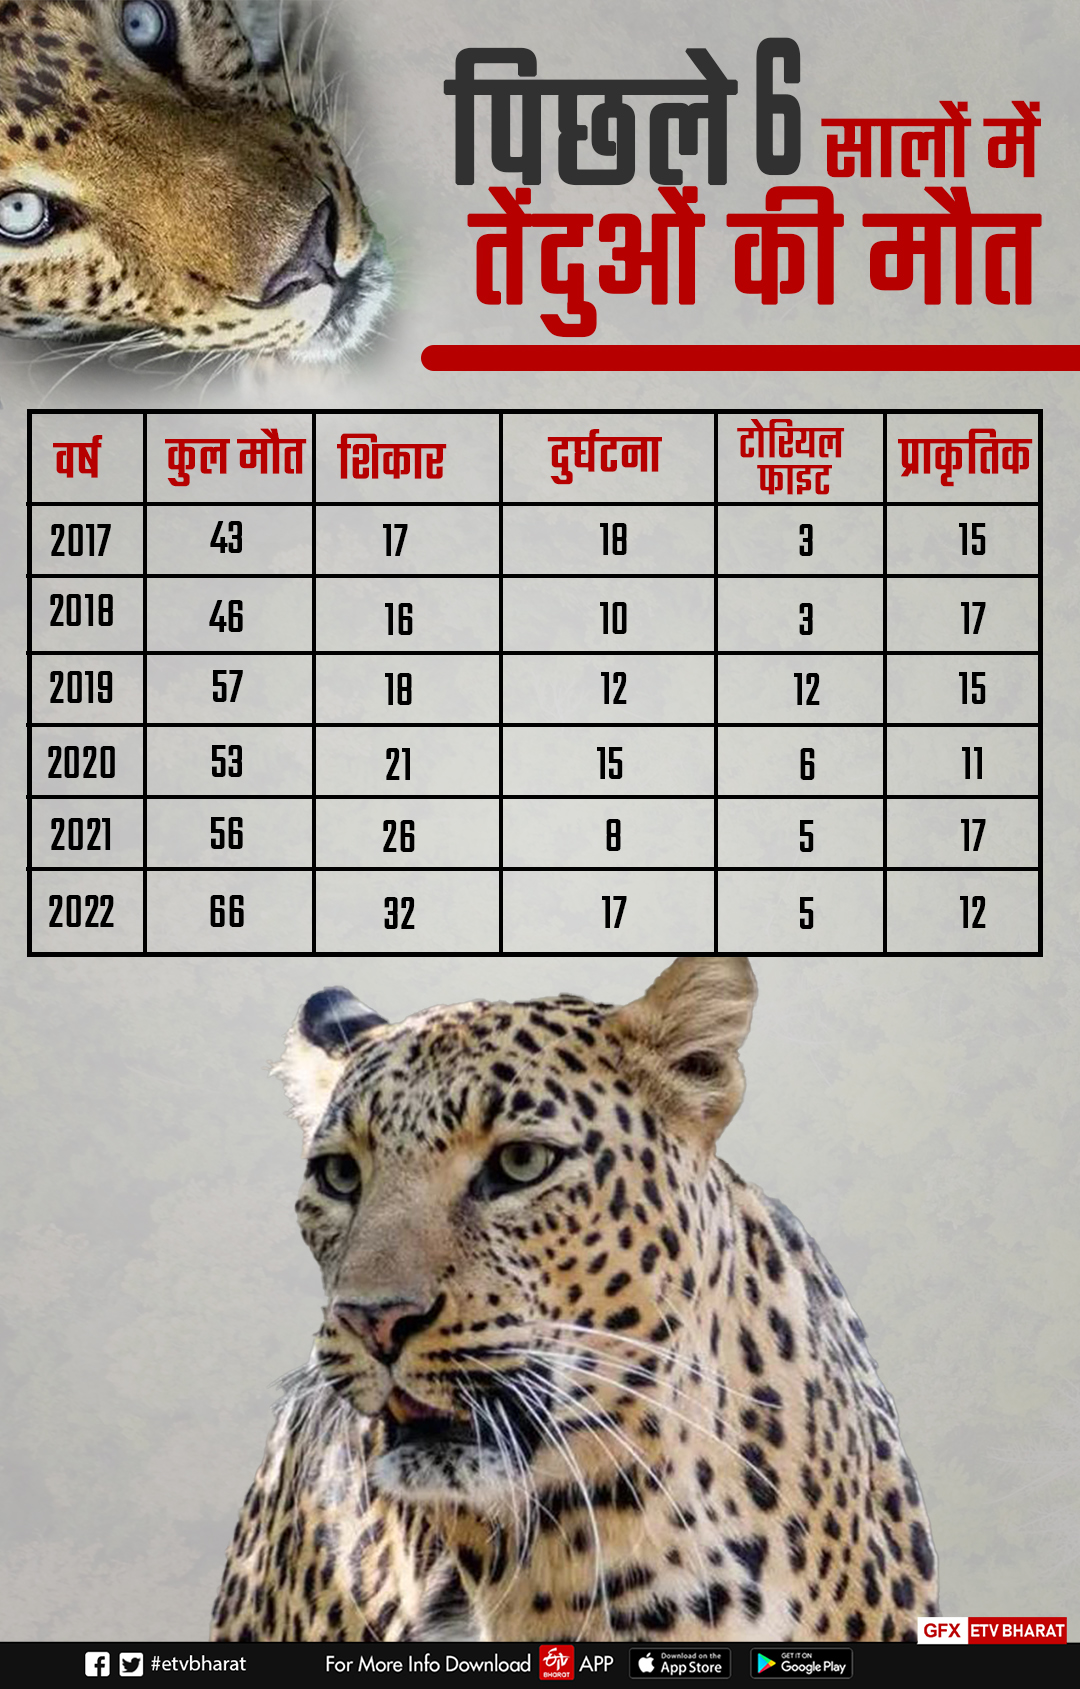 How many leopards died in six years